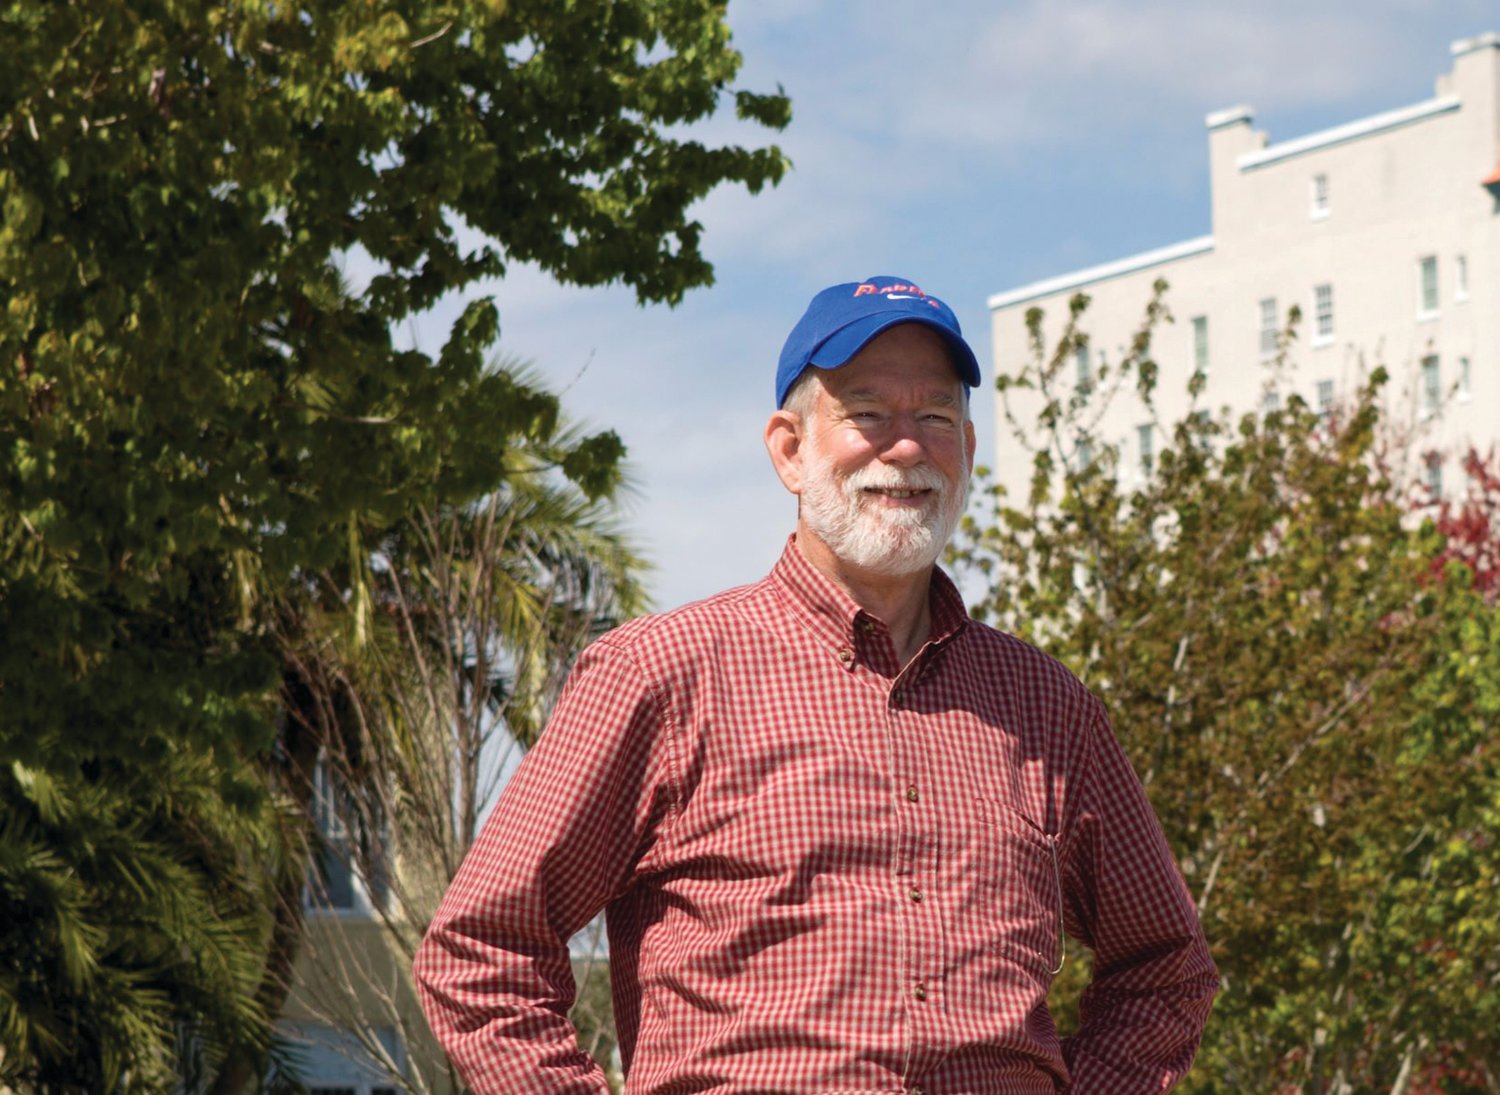 Rob Northrop, seen here, is the urban forester for UF/IFAS Extension Hillsborough County. He has been named an honorary member of the Society of Municipal Arborists.